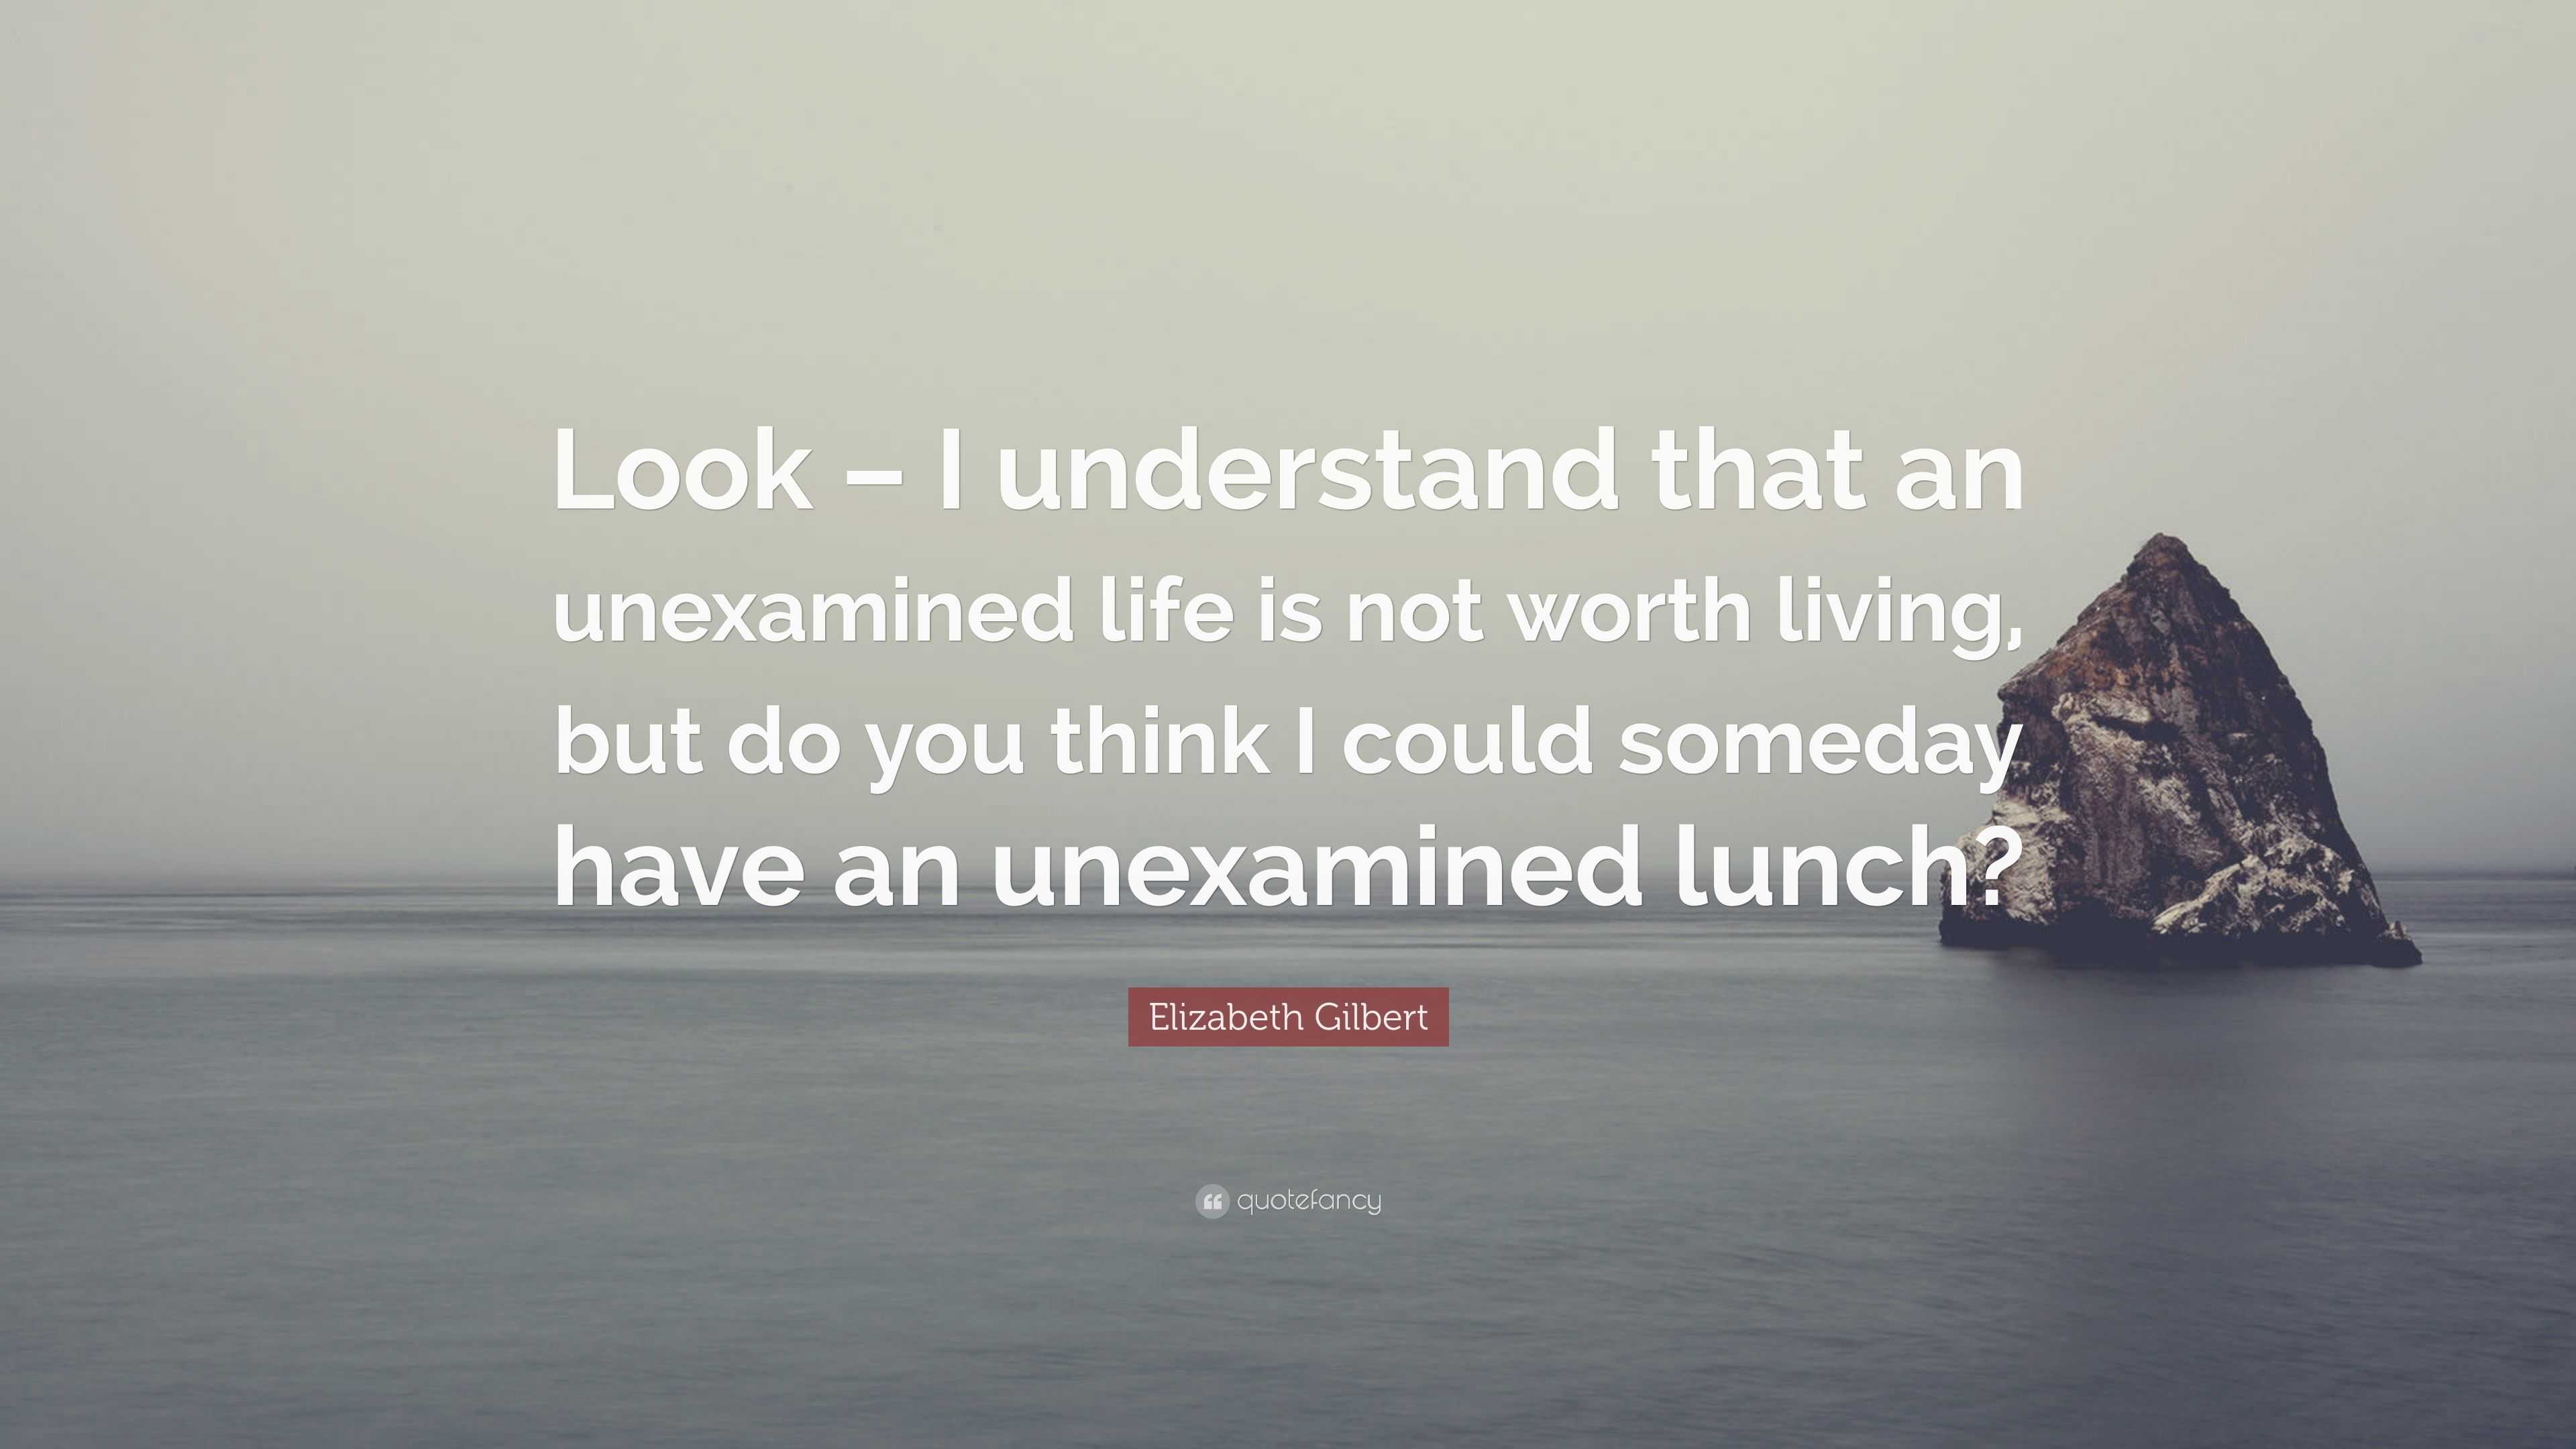 the unexamined life quote elizabeth gilbert quote u201clook u2013 i understand that an unexamined